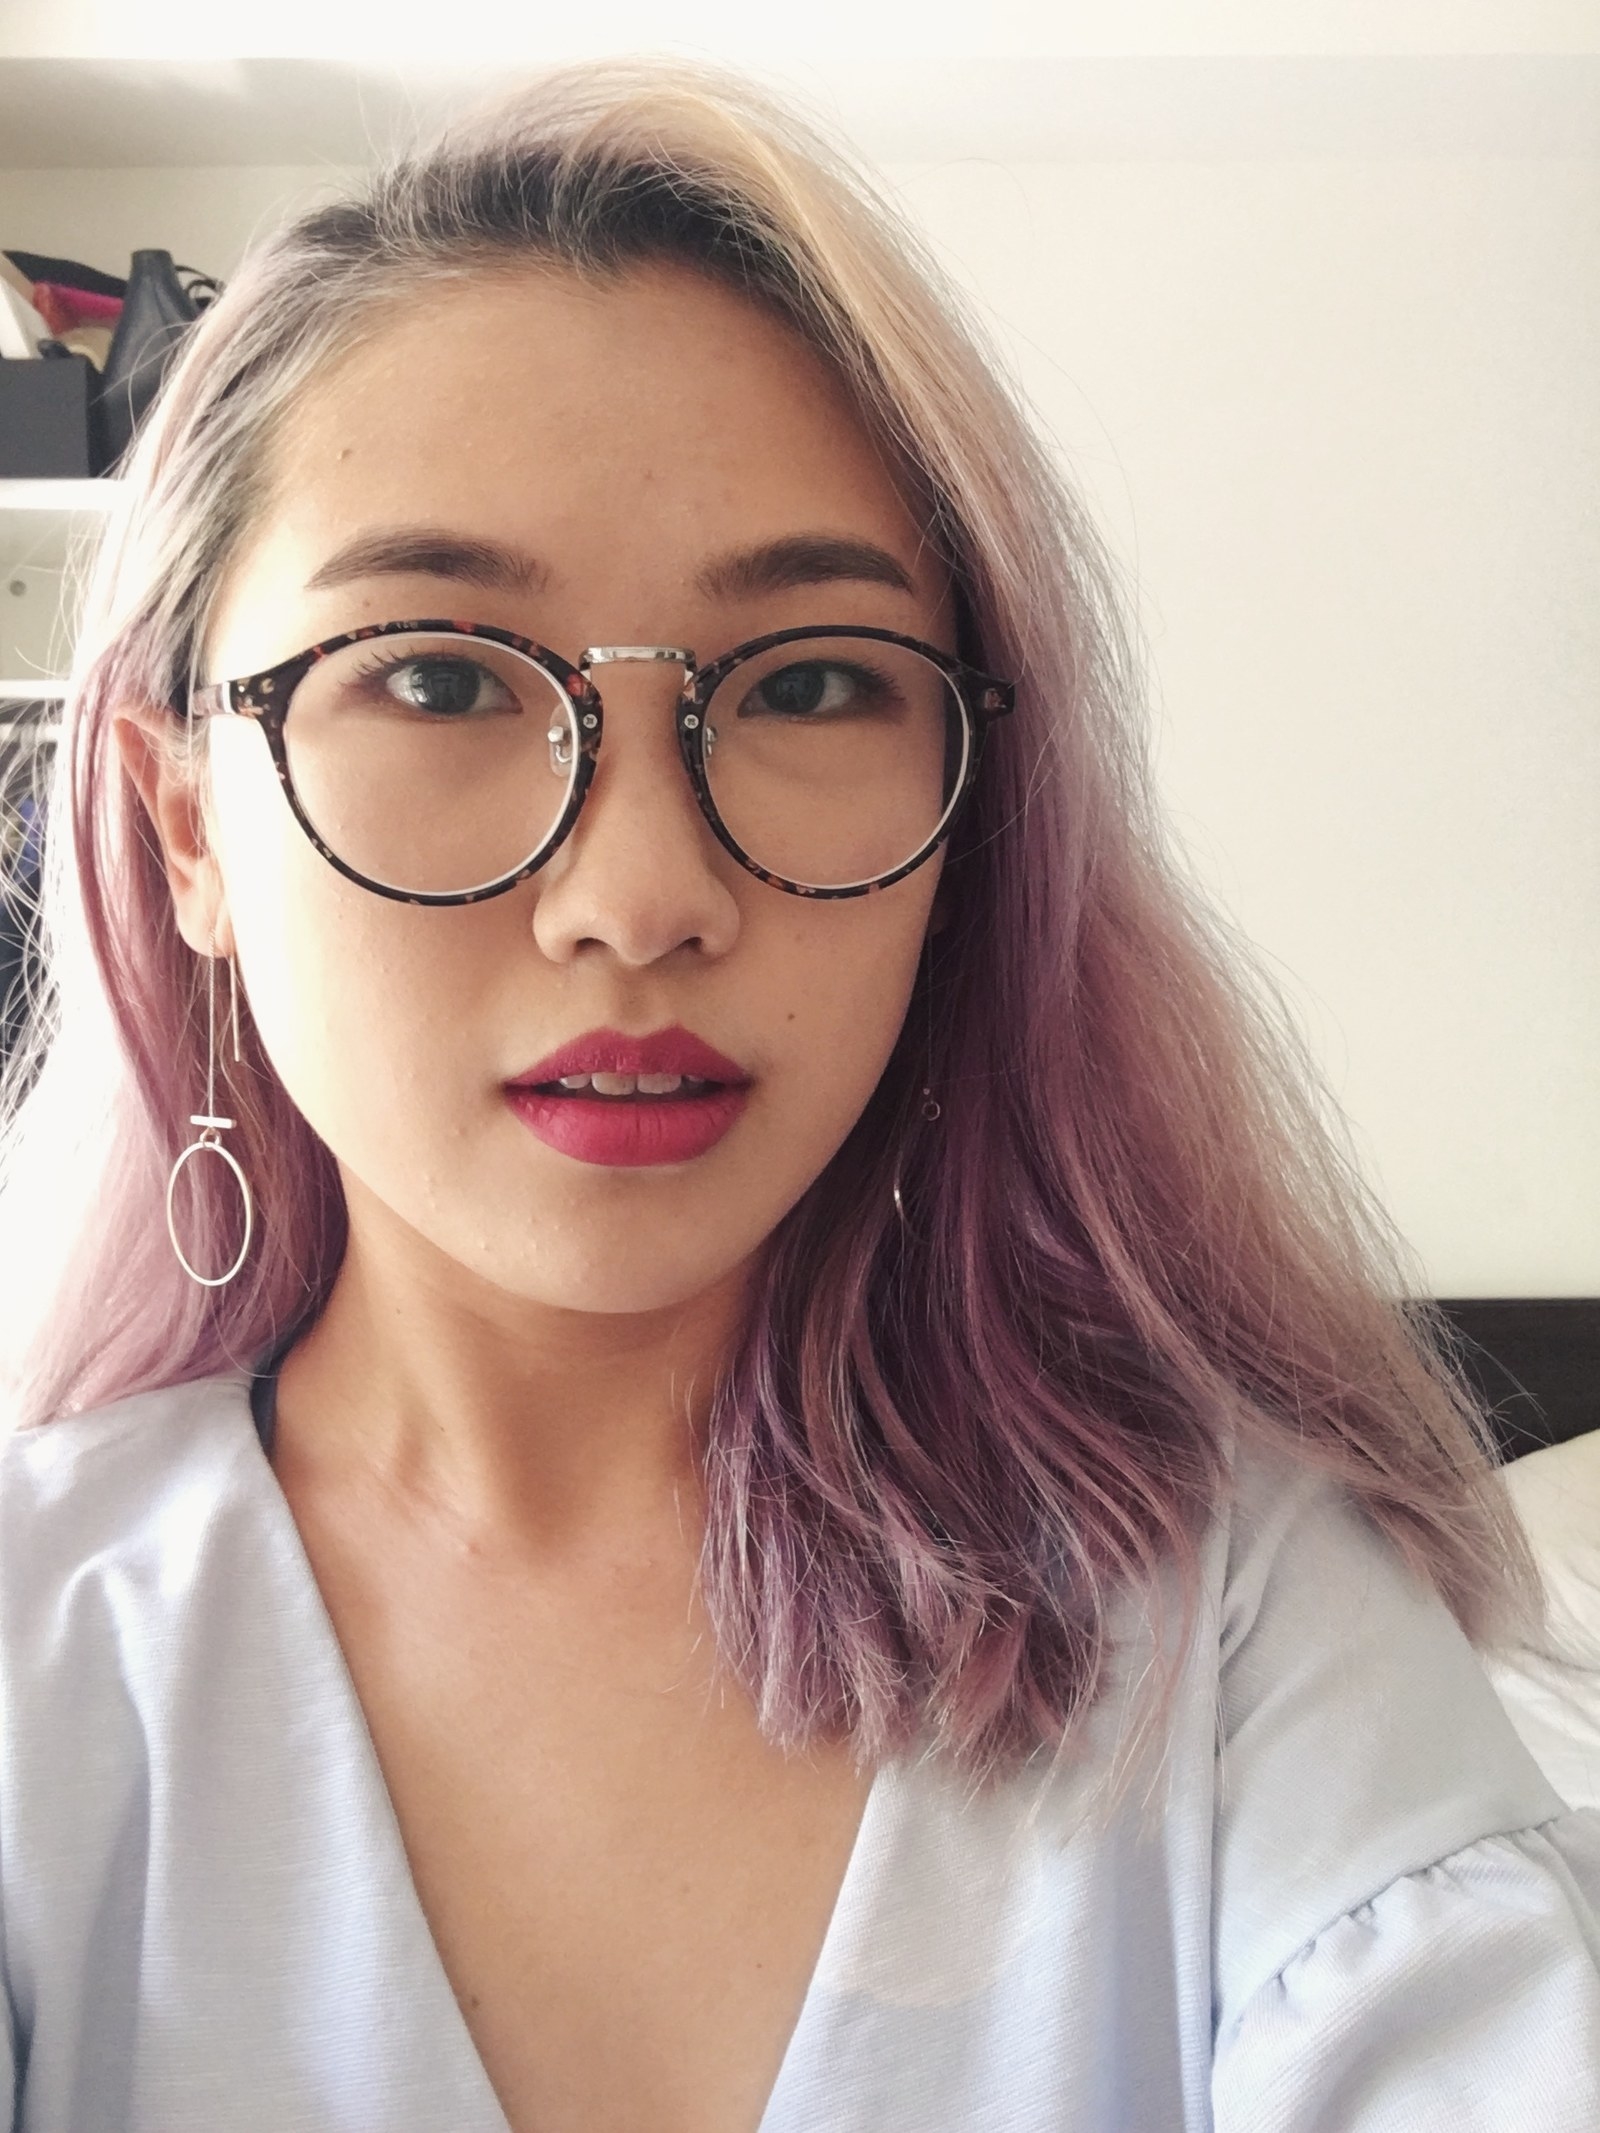 Super Affordable Prescription Glasses Styled by Sarah {$5 off code